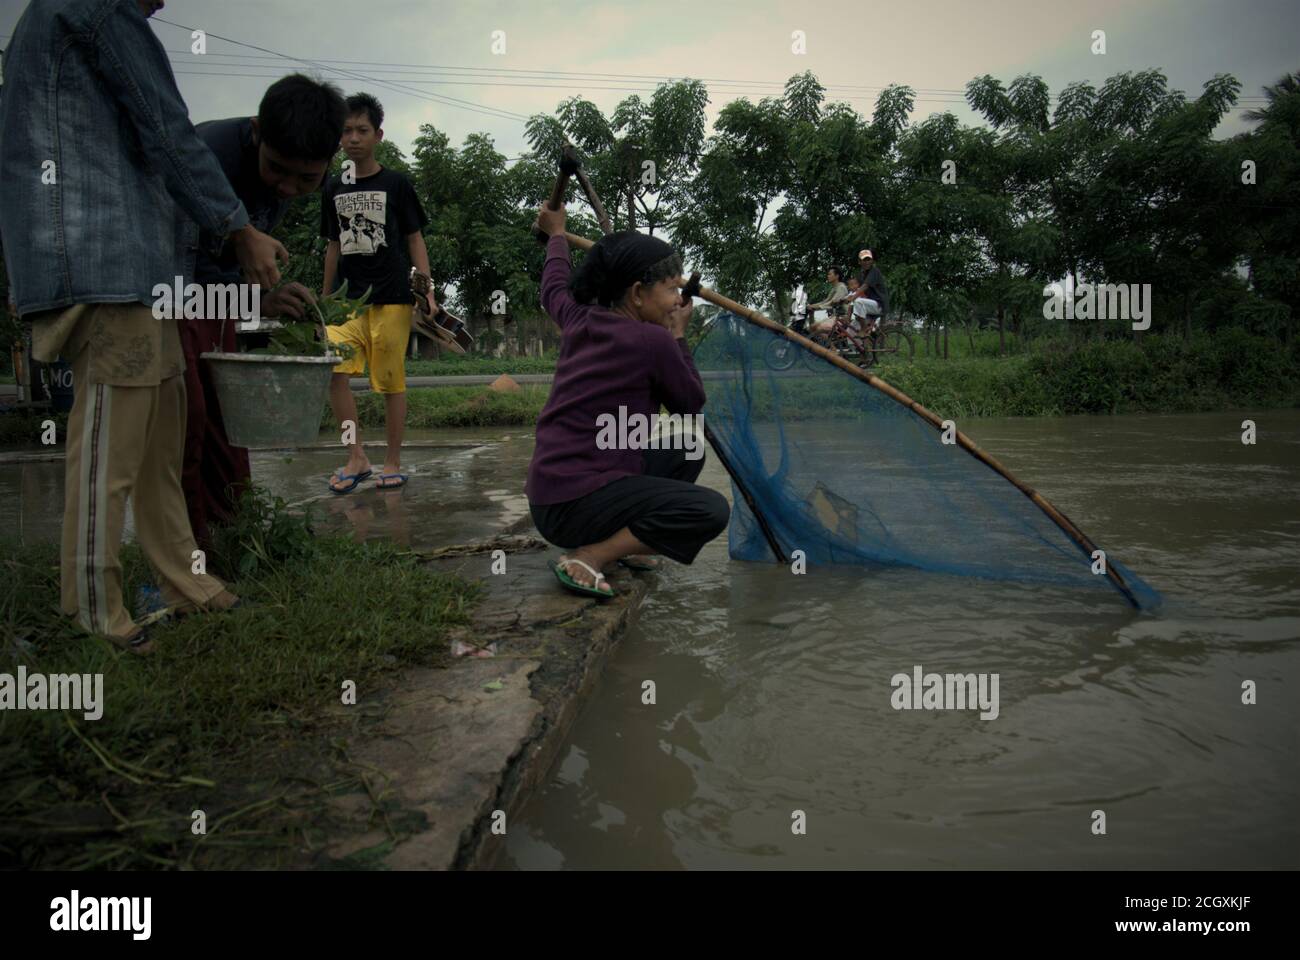 A woman handling pushnet while her friend carrying plastic bucket containing the catch as they fish on a roadside irrigation canal in Karawang regency, West Java province, Indonesia. Stock Photo